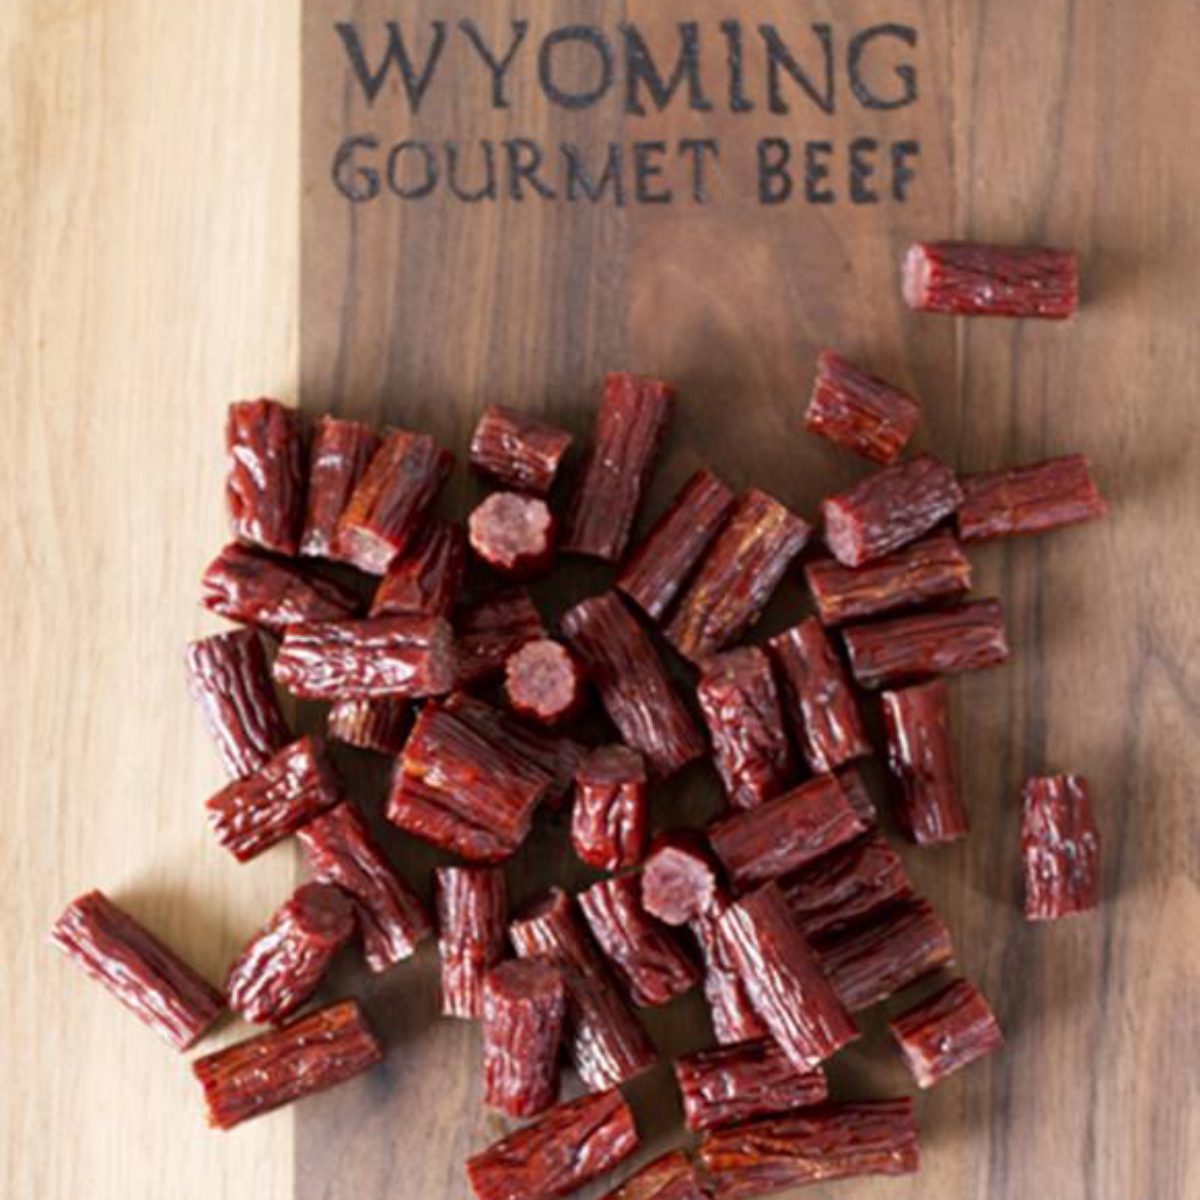 <p><strong><a class="SWhtmlLink" href="http://www.wyominggourmetbeef.com/" rel="noopener">Wyoming Gourmet Beef</a>, Cody</strong></p> <p>It's not surprising that the Cowboy state is flush with beef jerky! You can order Wyoming Gourmet Beef from anywhere in the country, except Alaska and Hawaii. Their gluten-free, MSG-free, nitrite-free beef sticks are some of the best in the business.</p>